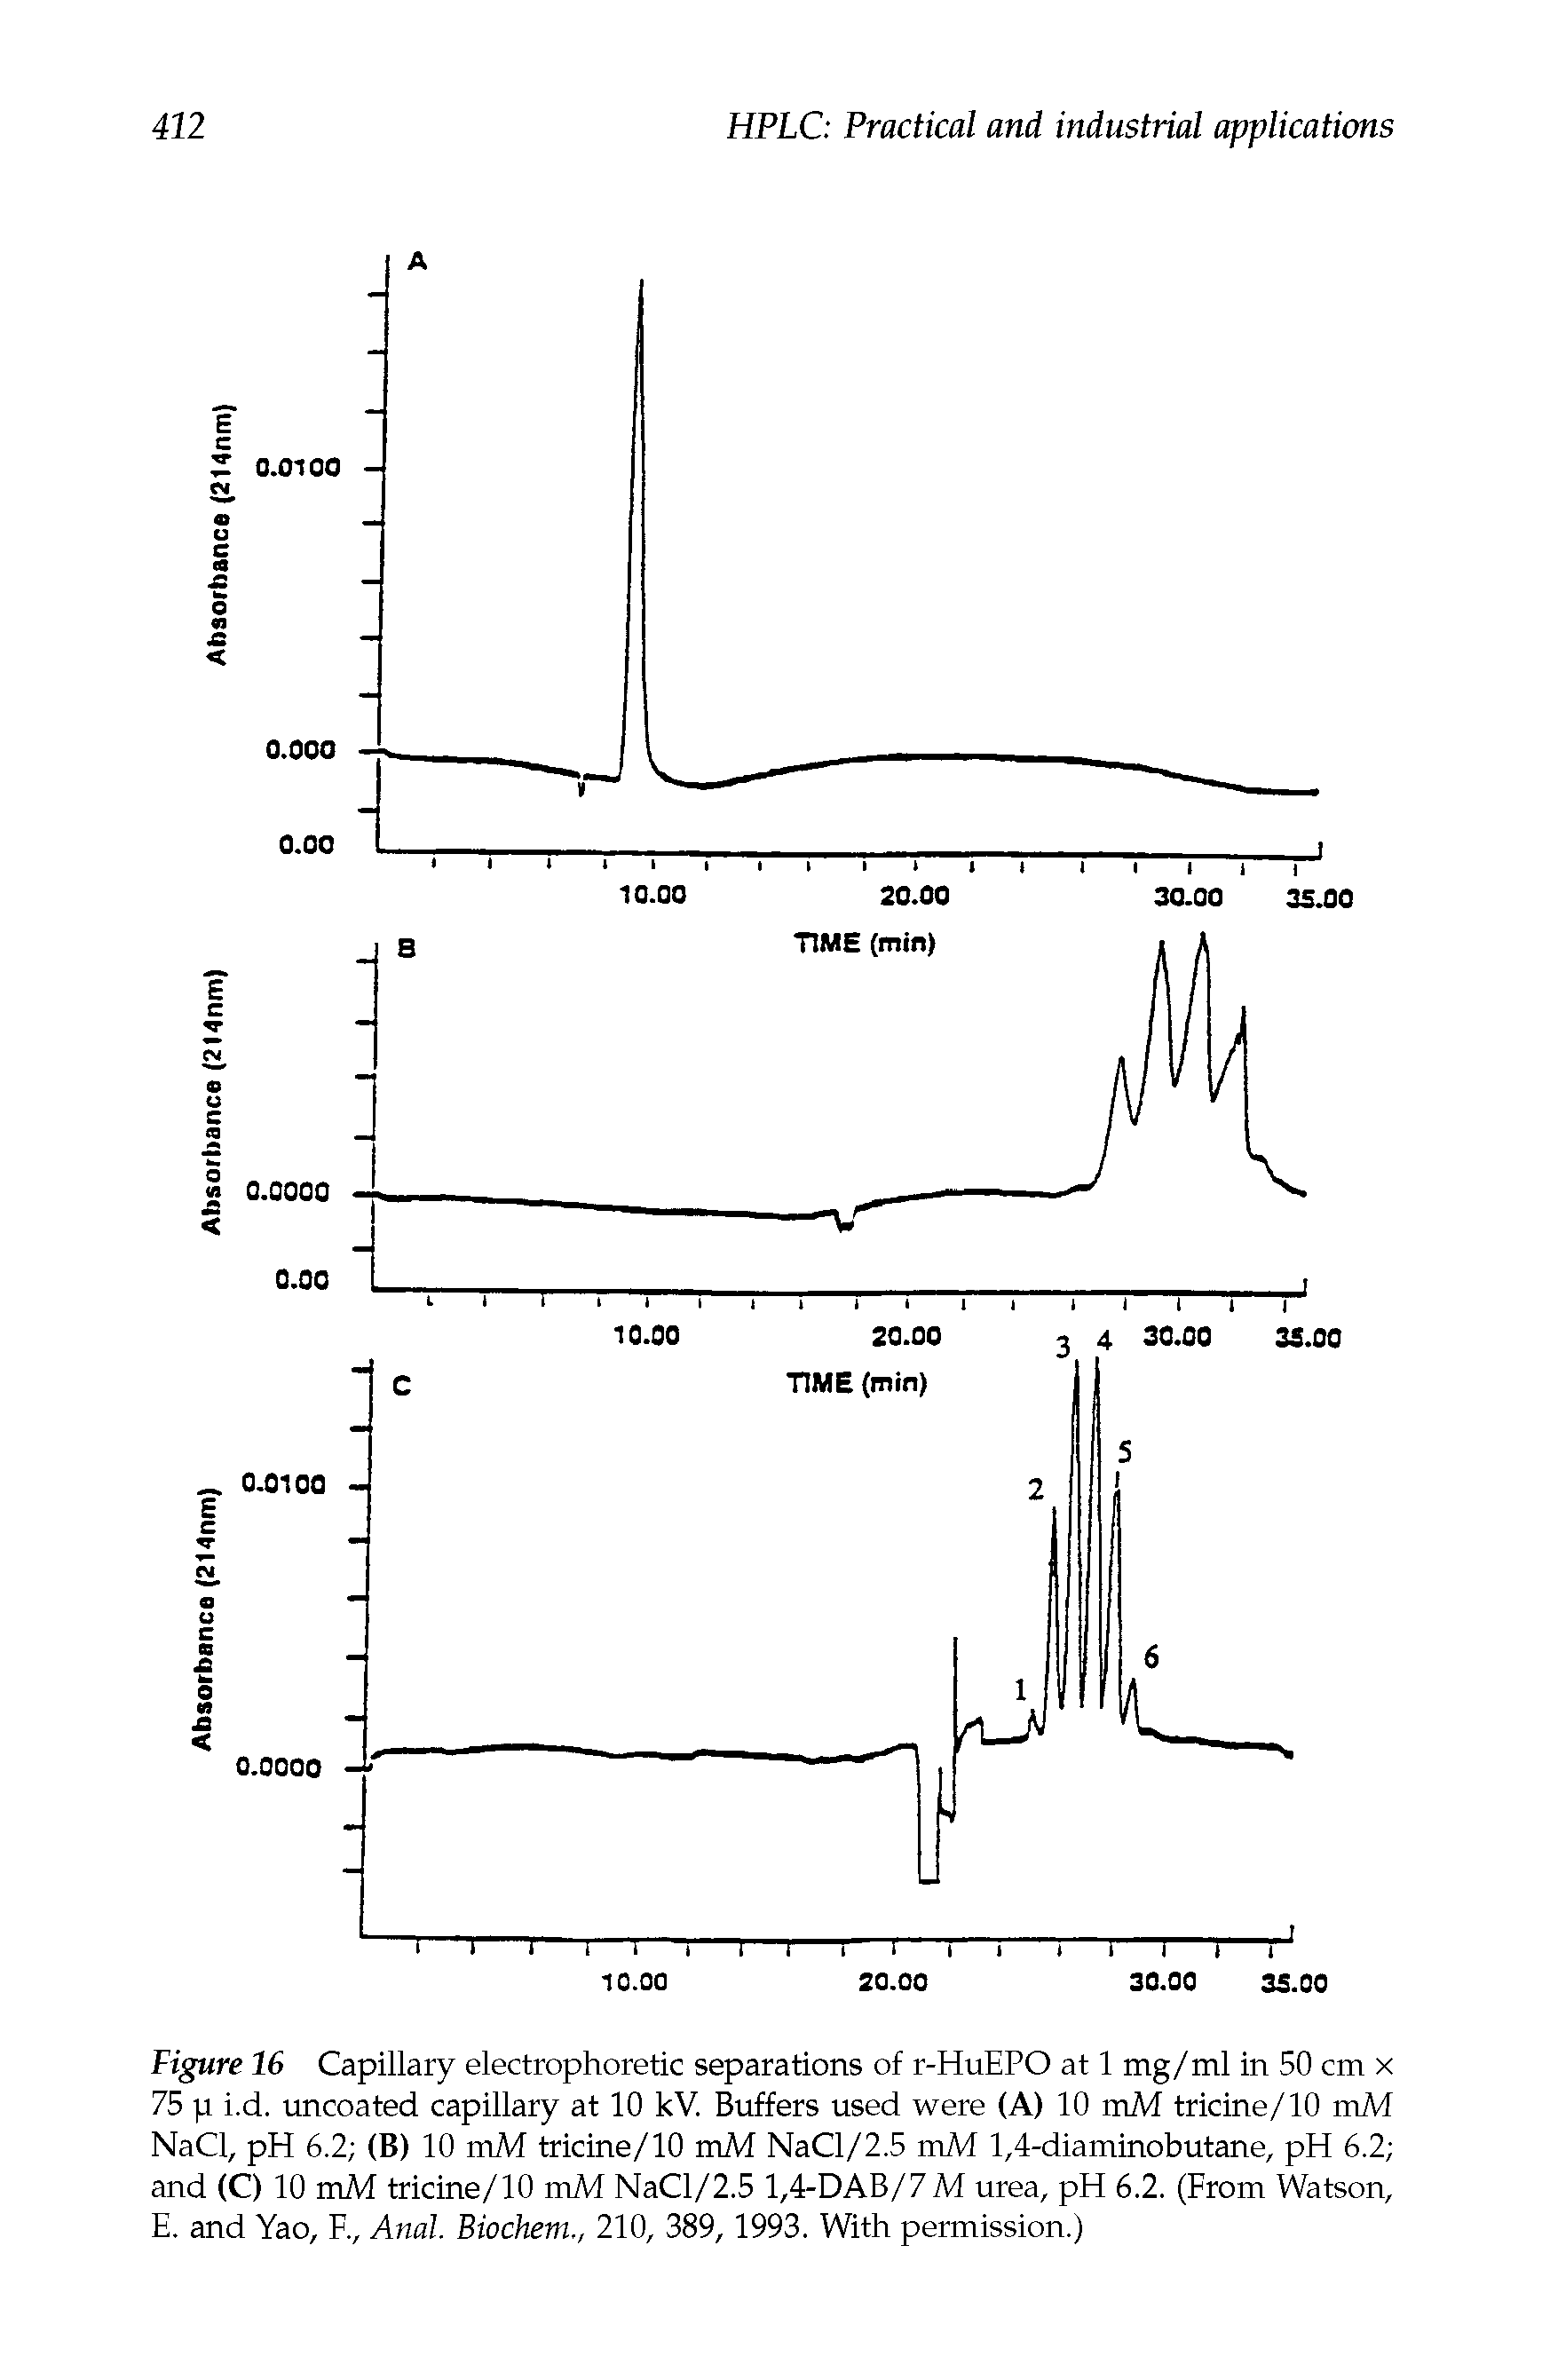 Figure 16 Capillary electrophoretic separations of r-HuEPO at 1 mg/ml in 50 cm x 75 p i.d. uncoated capillary at 10 kV. Buffers used were (A) 10 mM tricine/10 mM NaCl, pH 6.2 (B) 10 mM tricine/10 mM NaCl/2.5 mM 1,4-diaminobutane, pH 6.2 and (C) 10 mM tricine/10 mM NaCl/2.5 l,4-DAB/7M urea, pH 6.2. (From Watson, E. and Yao, F., Anal. Biochem., 210, 389, 1993. With permission.)...